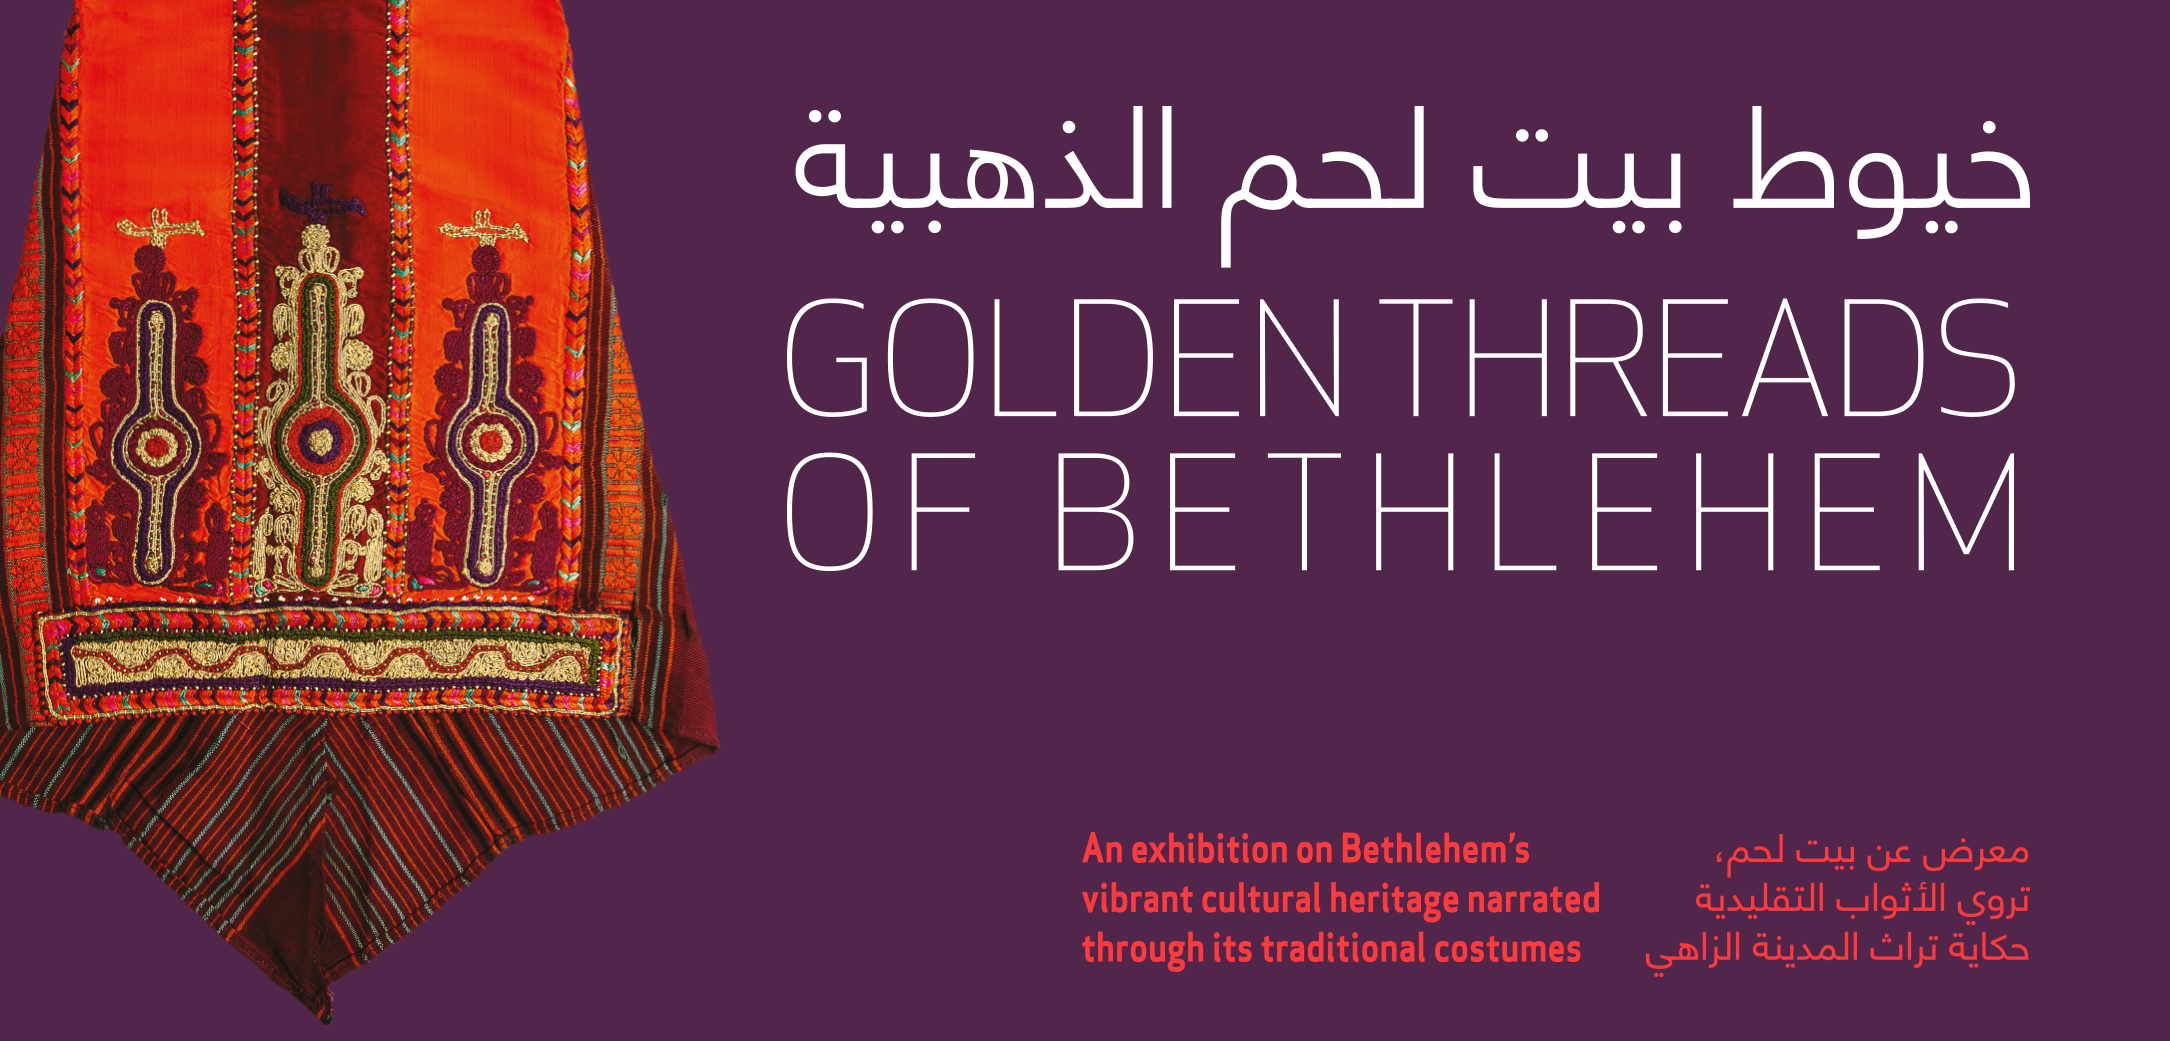 An exhibition on Bethlehem's vibrant cultural heritage narrated through its traditional costumes